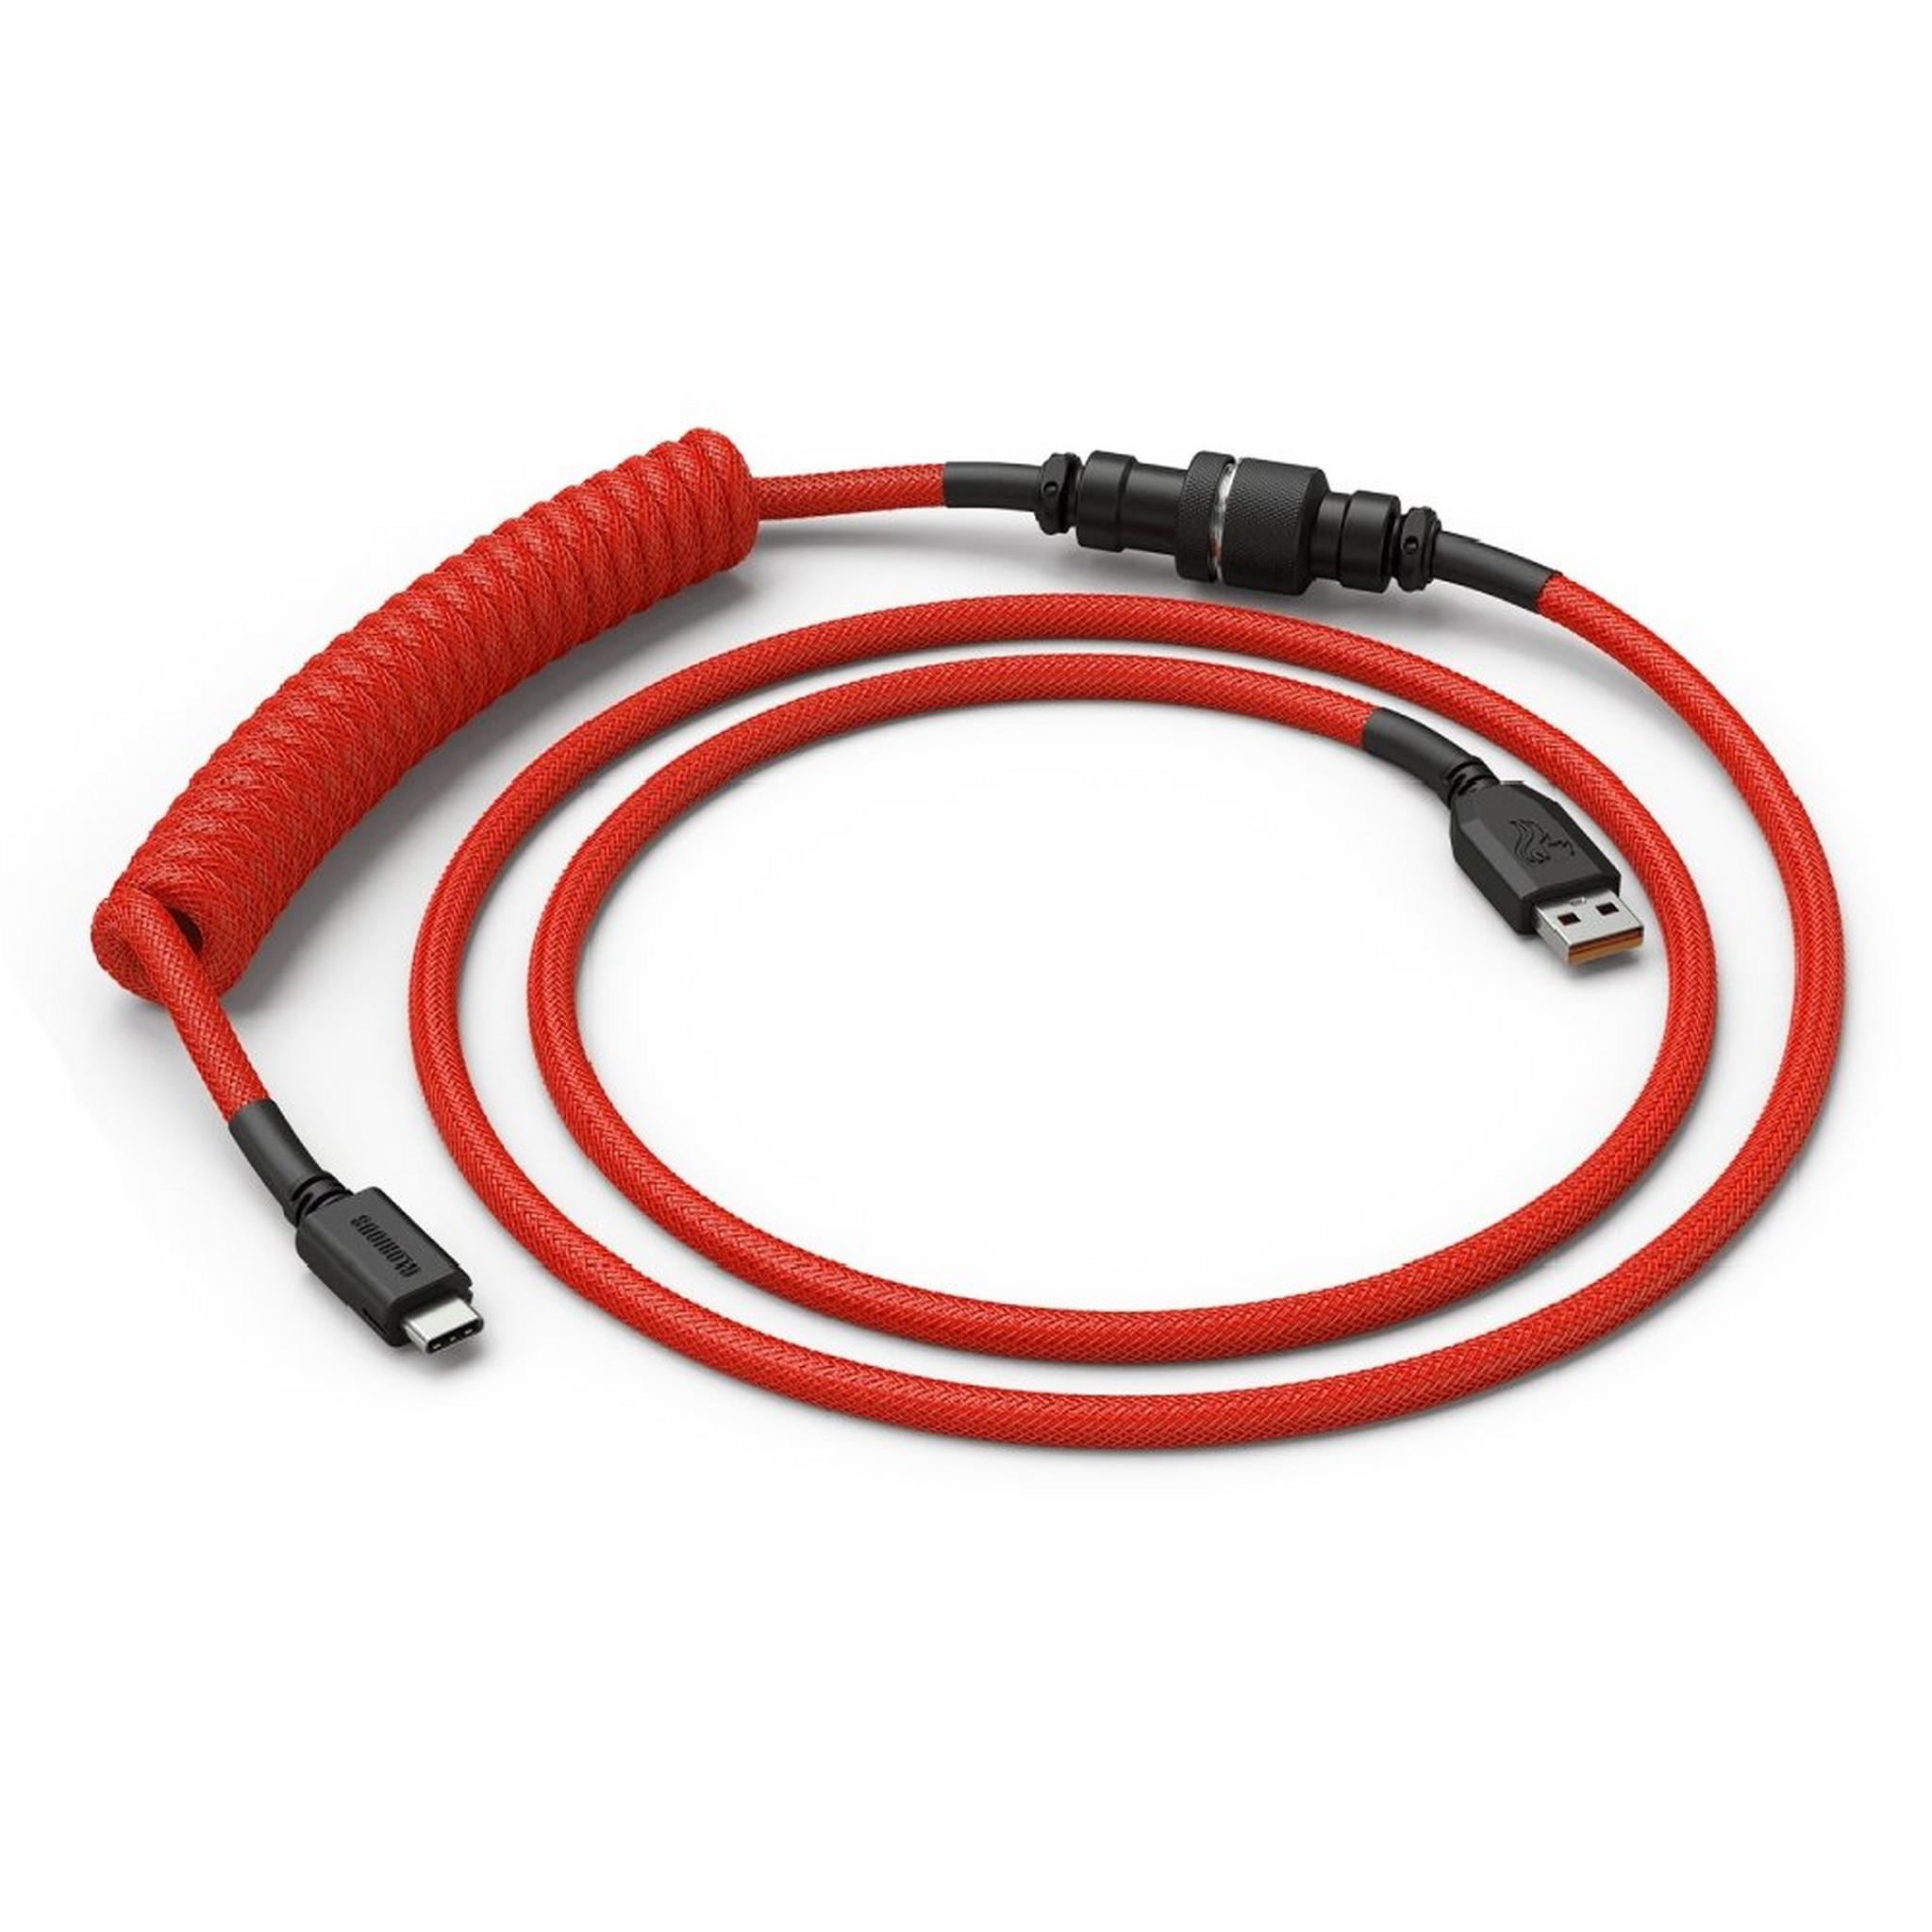 Glorious Coiled 4.5ft Cable for Keyboard - Crimson Red